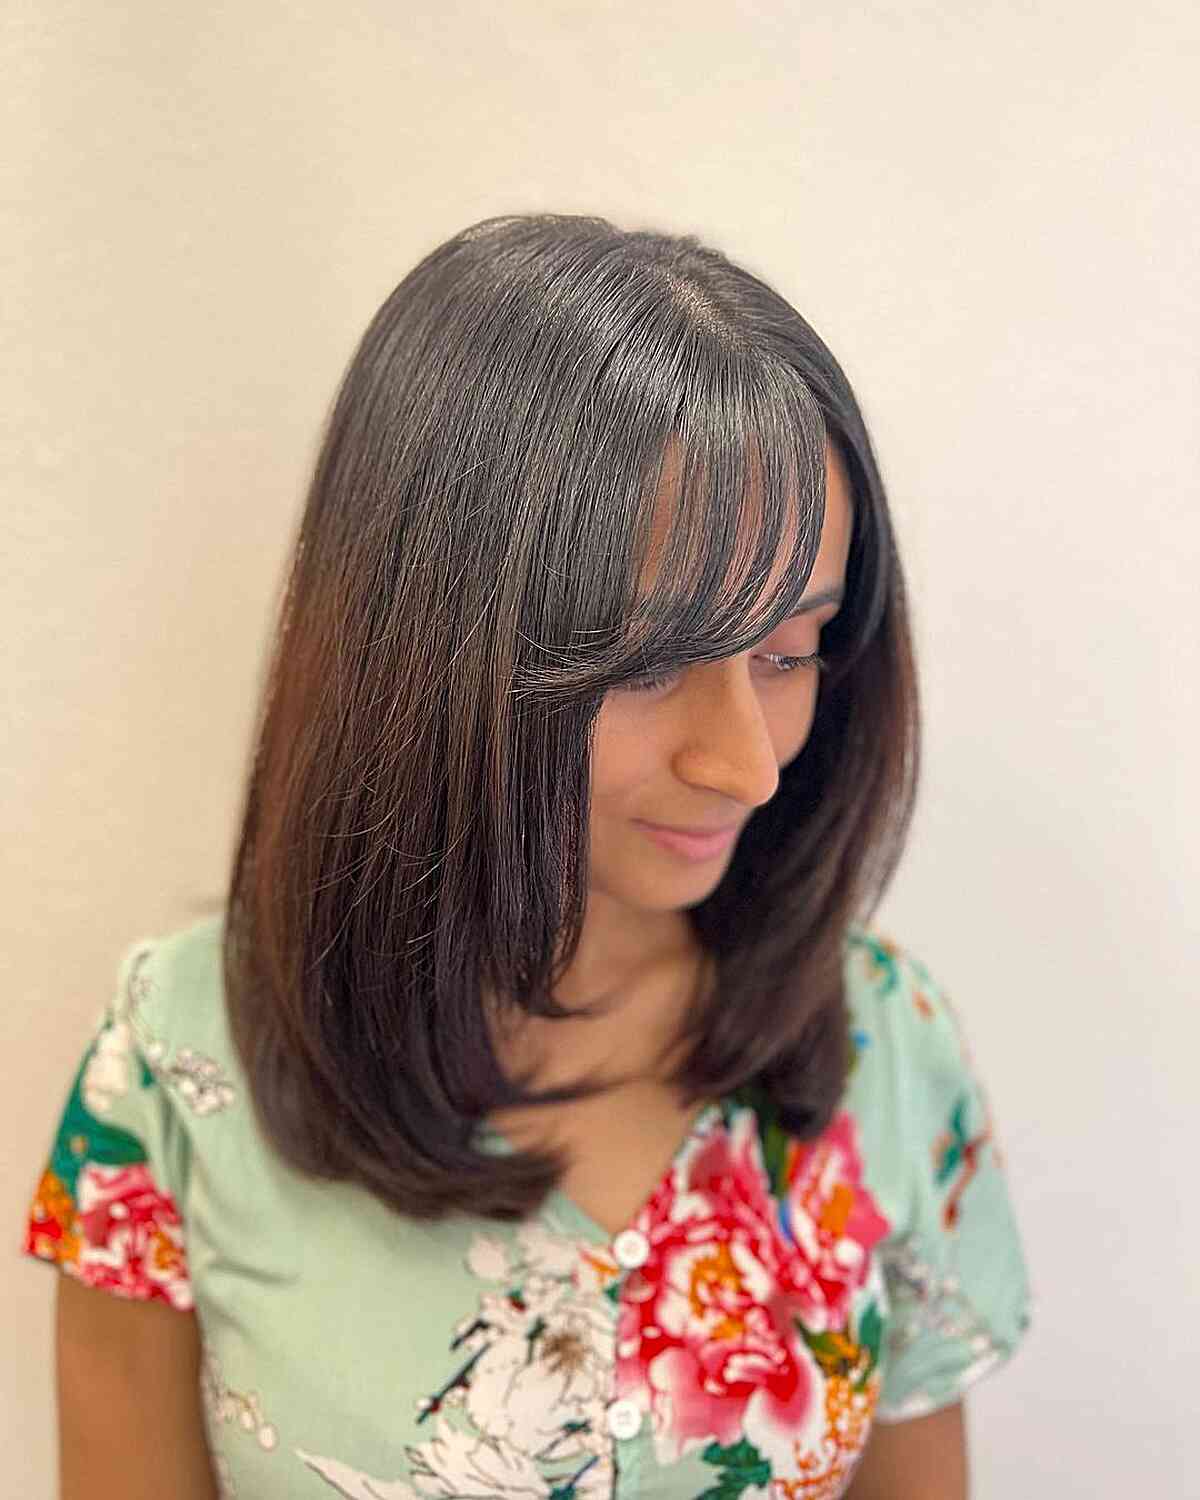 Medium Cut with Long See-Through Side Bangs and Subtle Layers